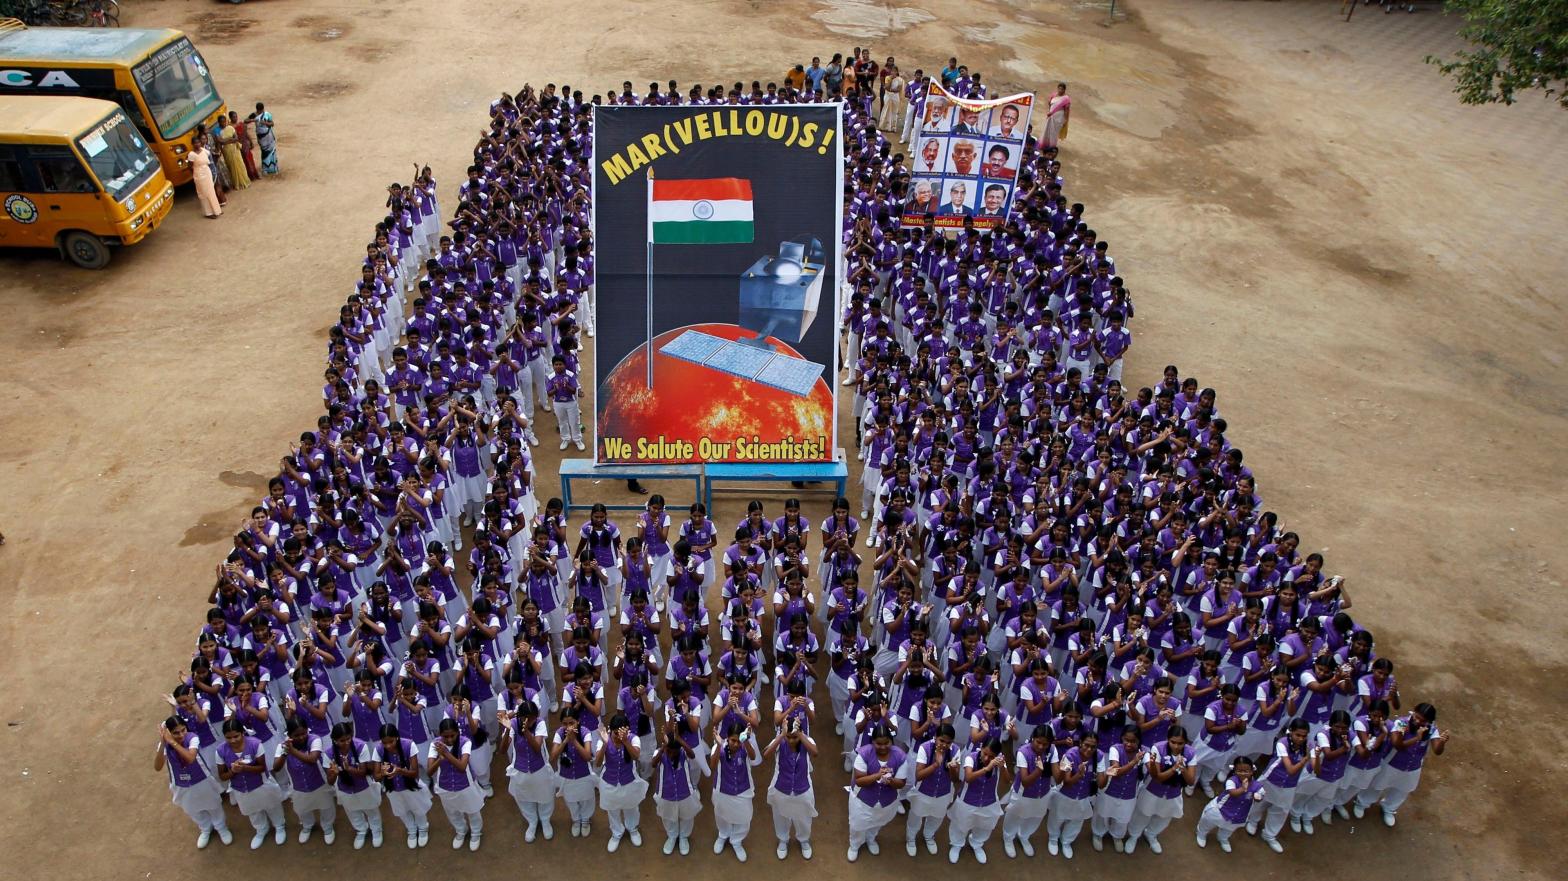 School children in India pose with a poster of the Mars Orbiter Mission. (Photo: ArunSankar K, AP)